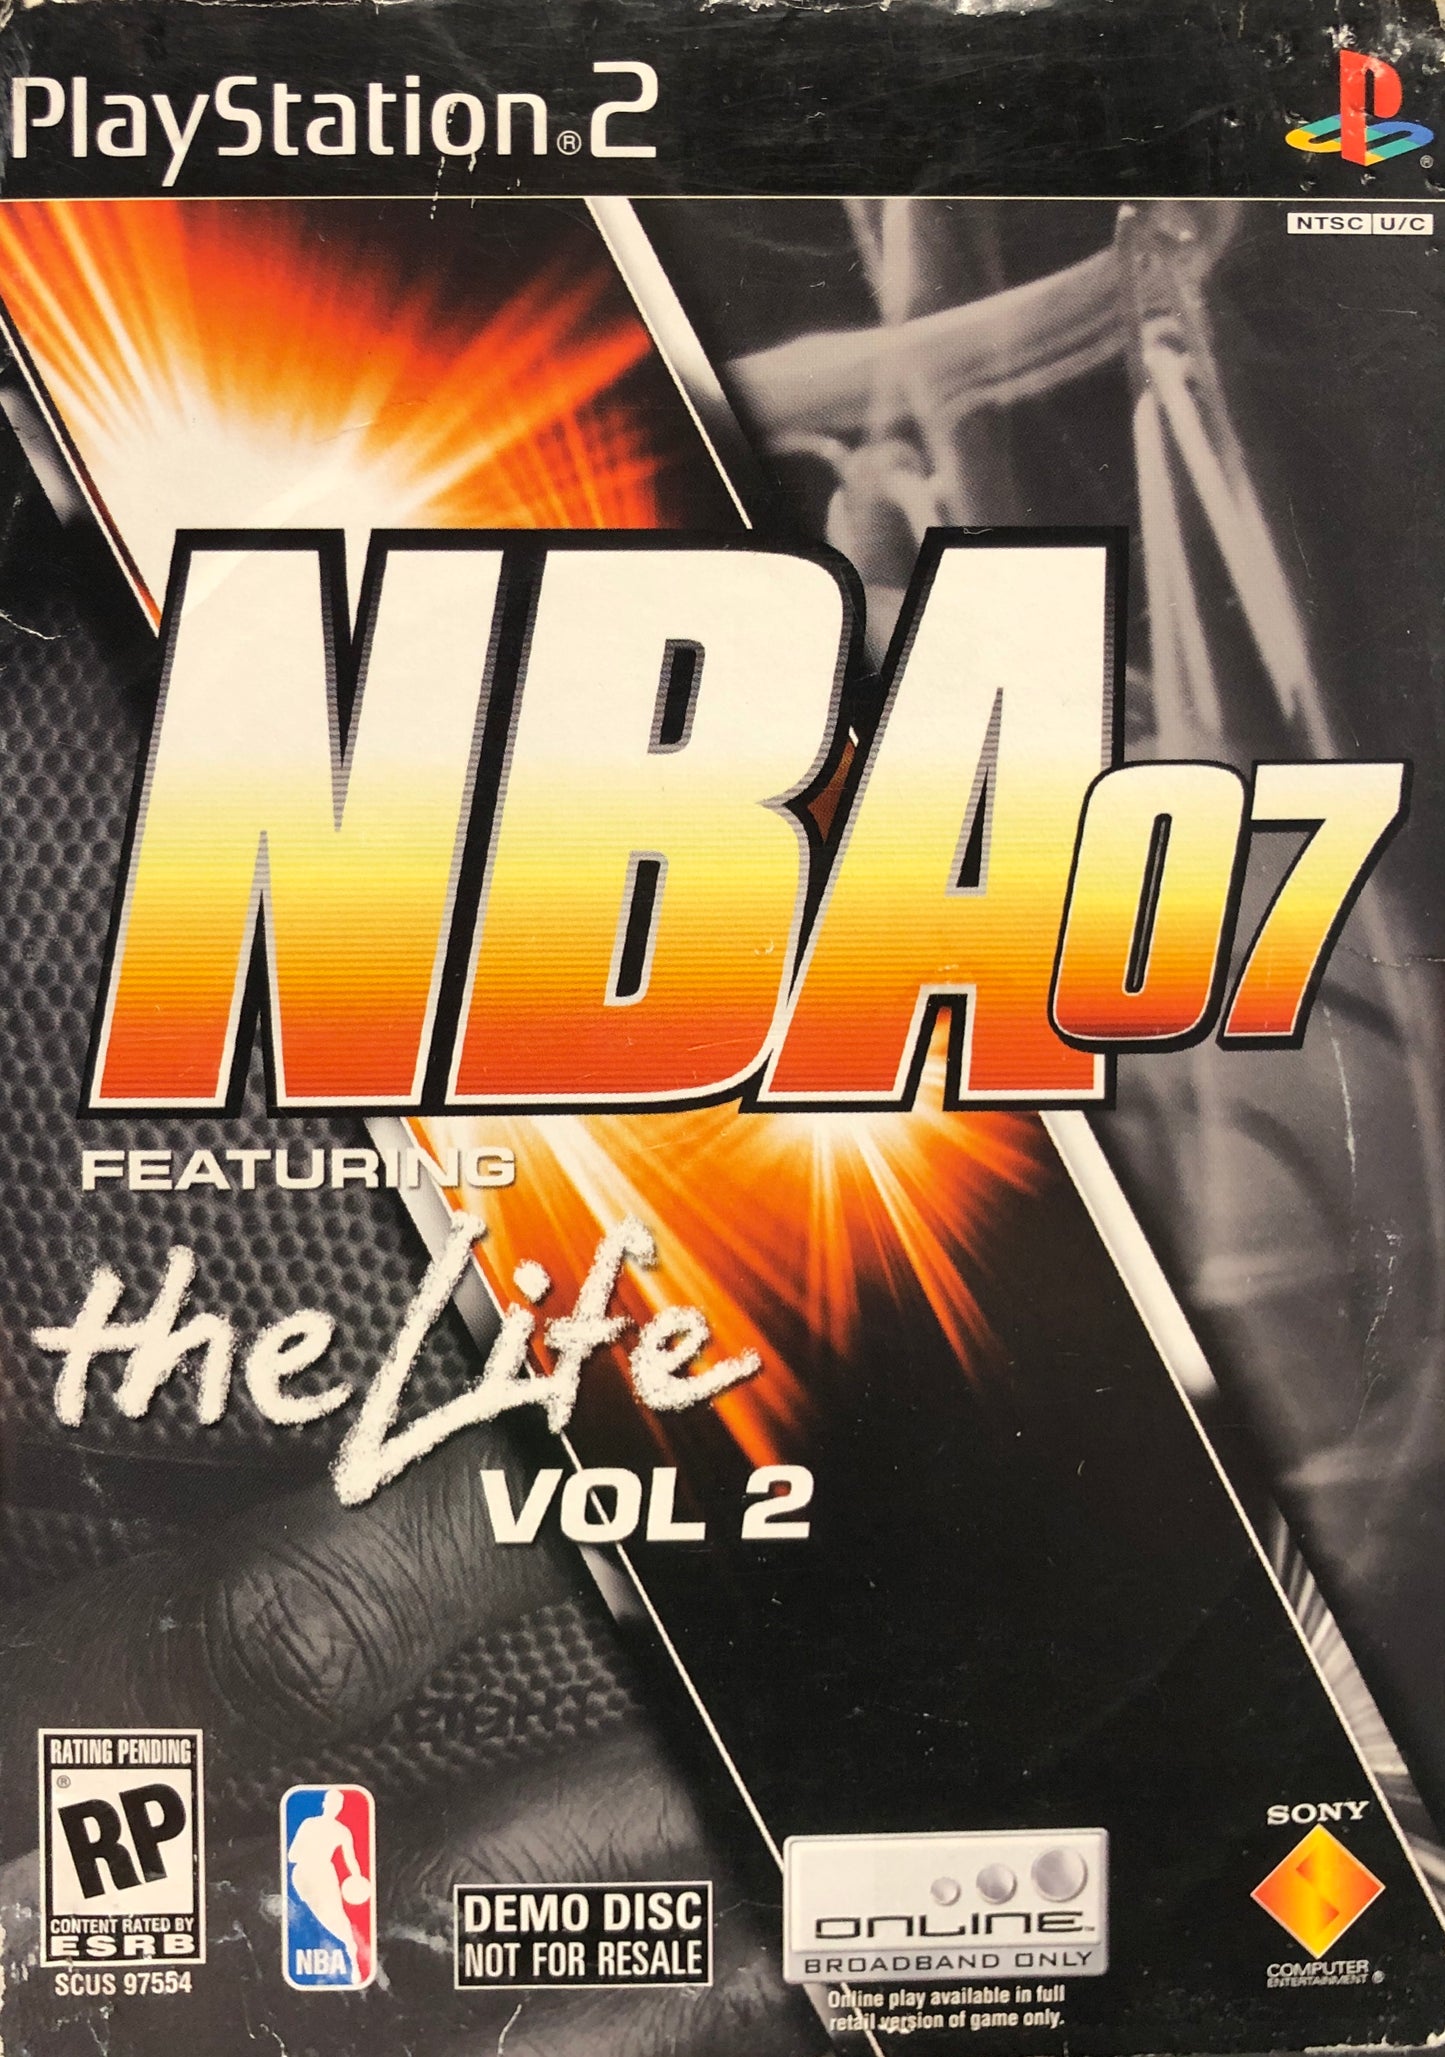 NBA 07 Featuring The Life Vol 2 [Demo Disc] - Playstation 2